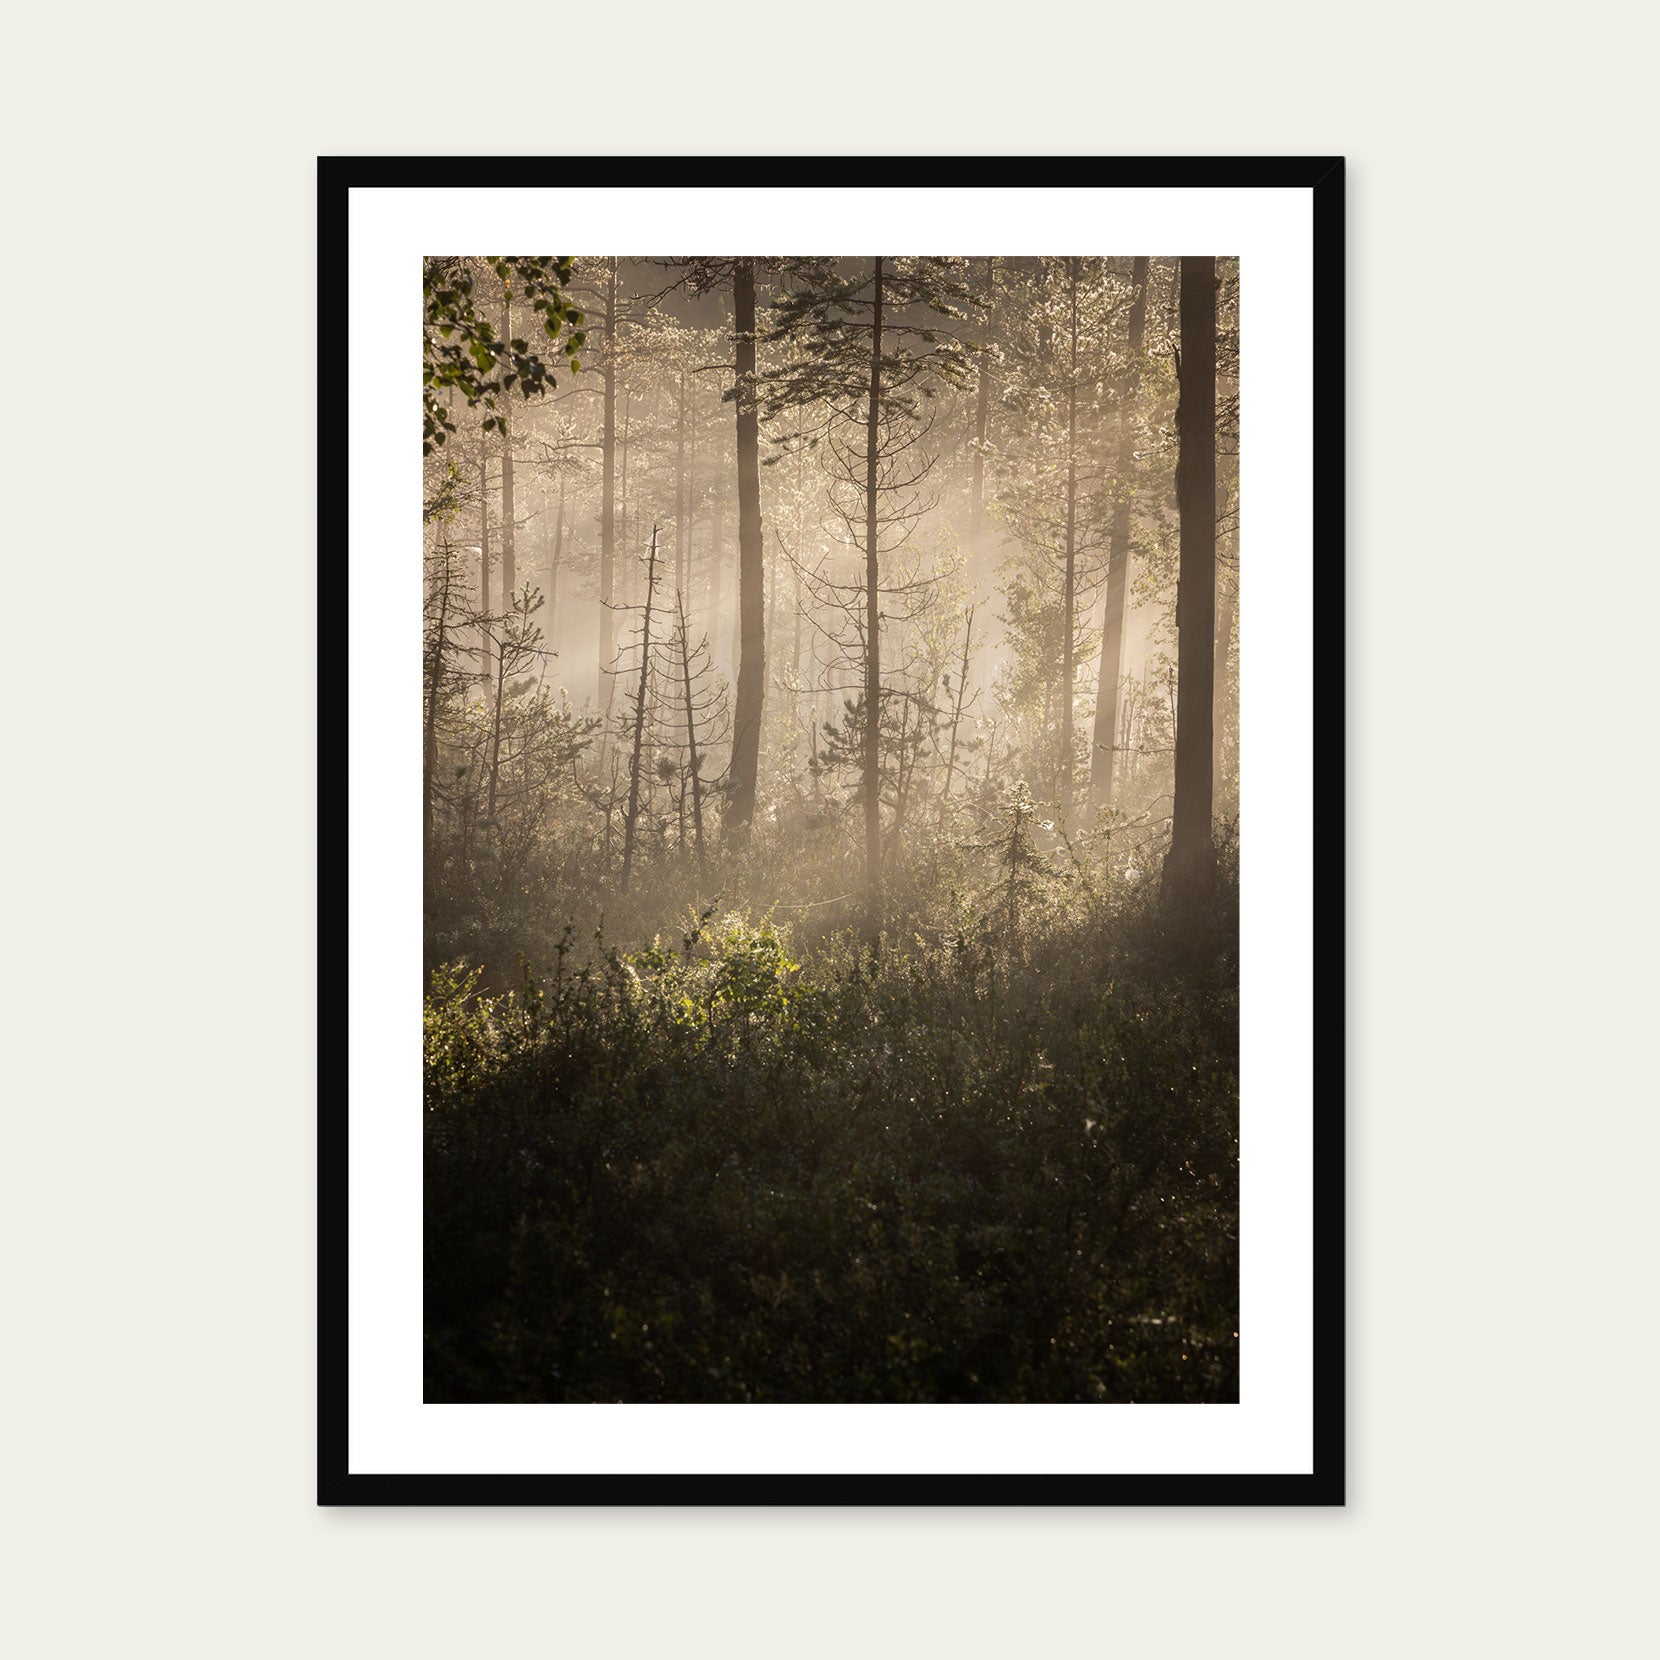 A black framed print of a dawn in the forest